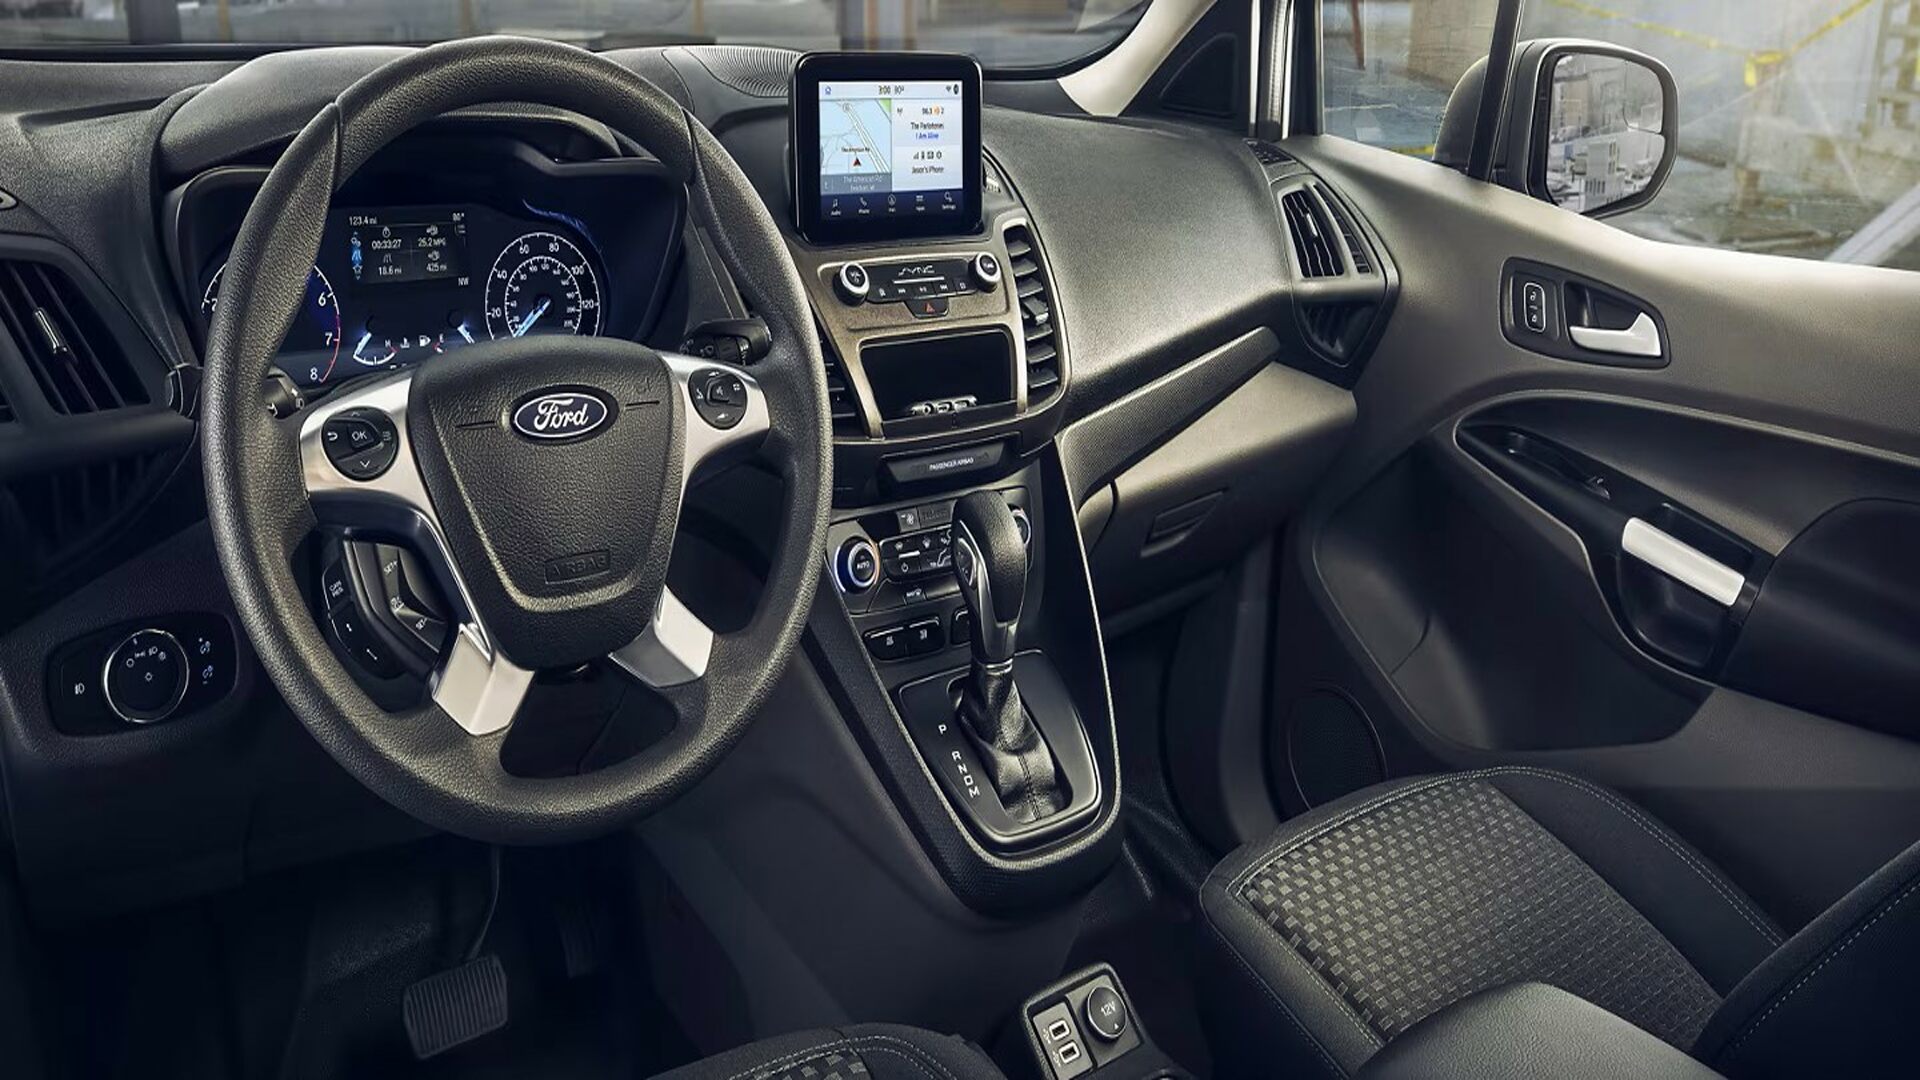 The Interior Of A Ford Transit Connect Vehicle (Credits": Ford)